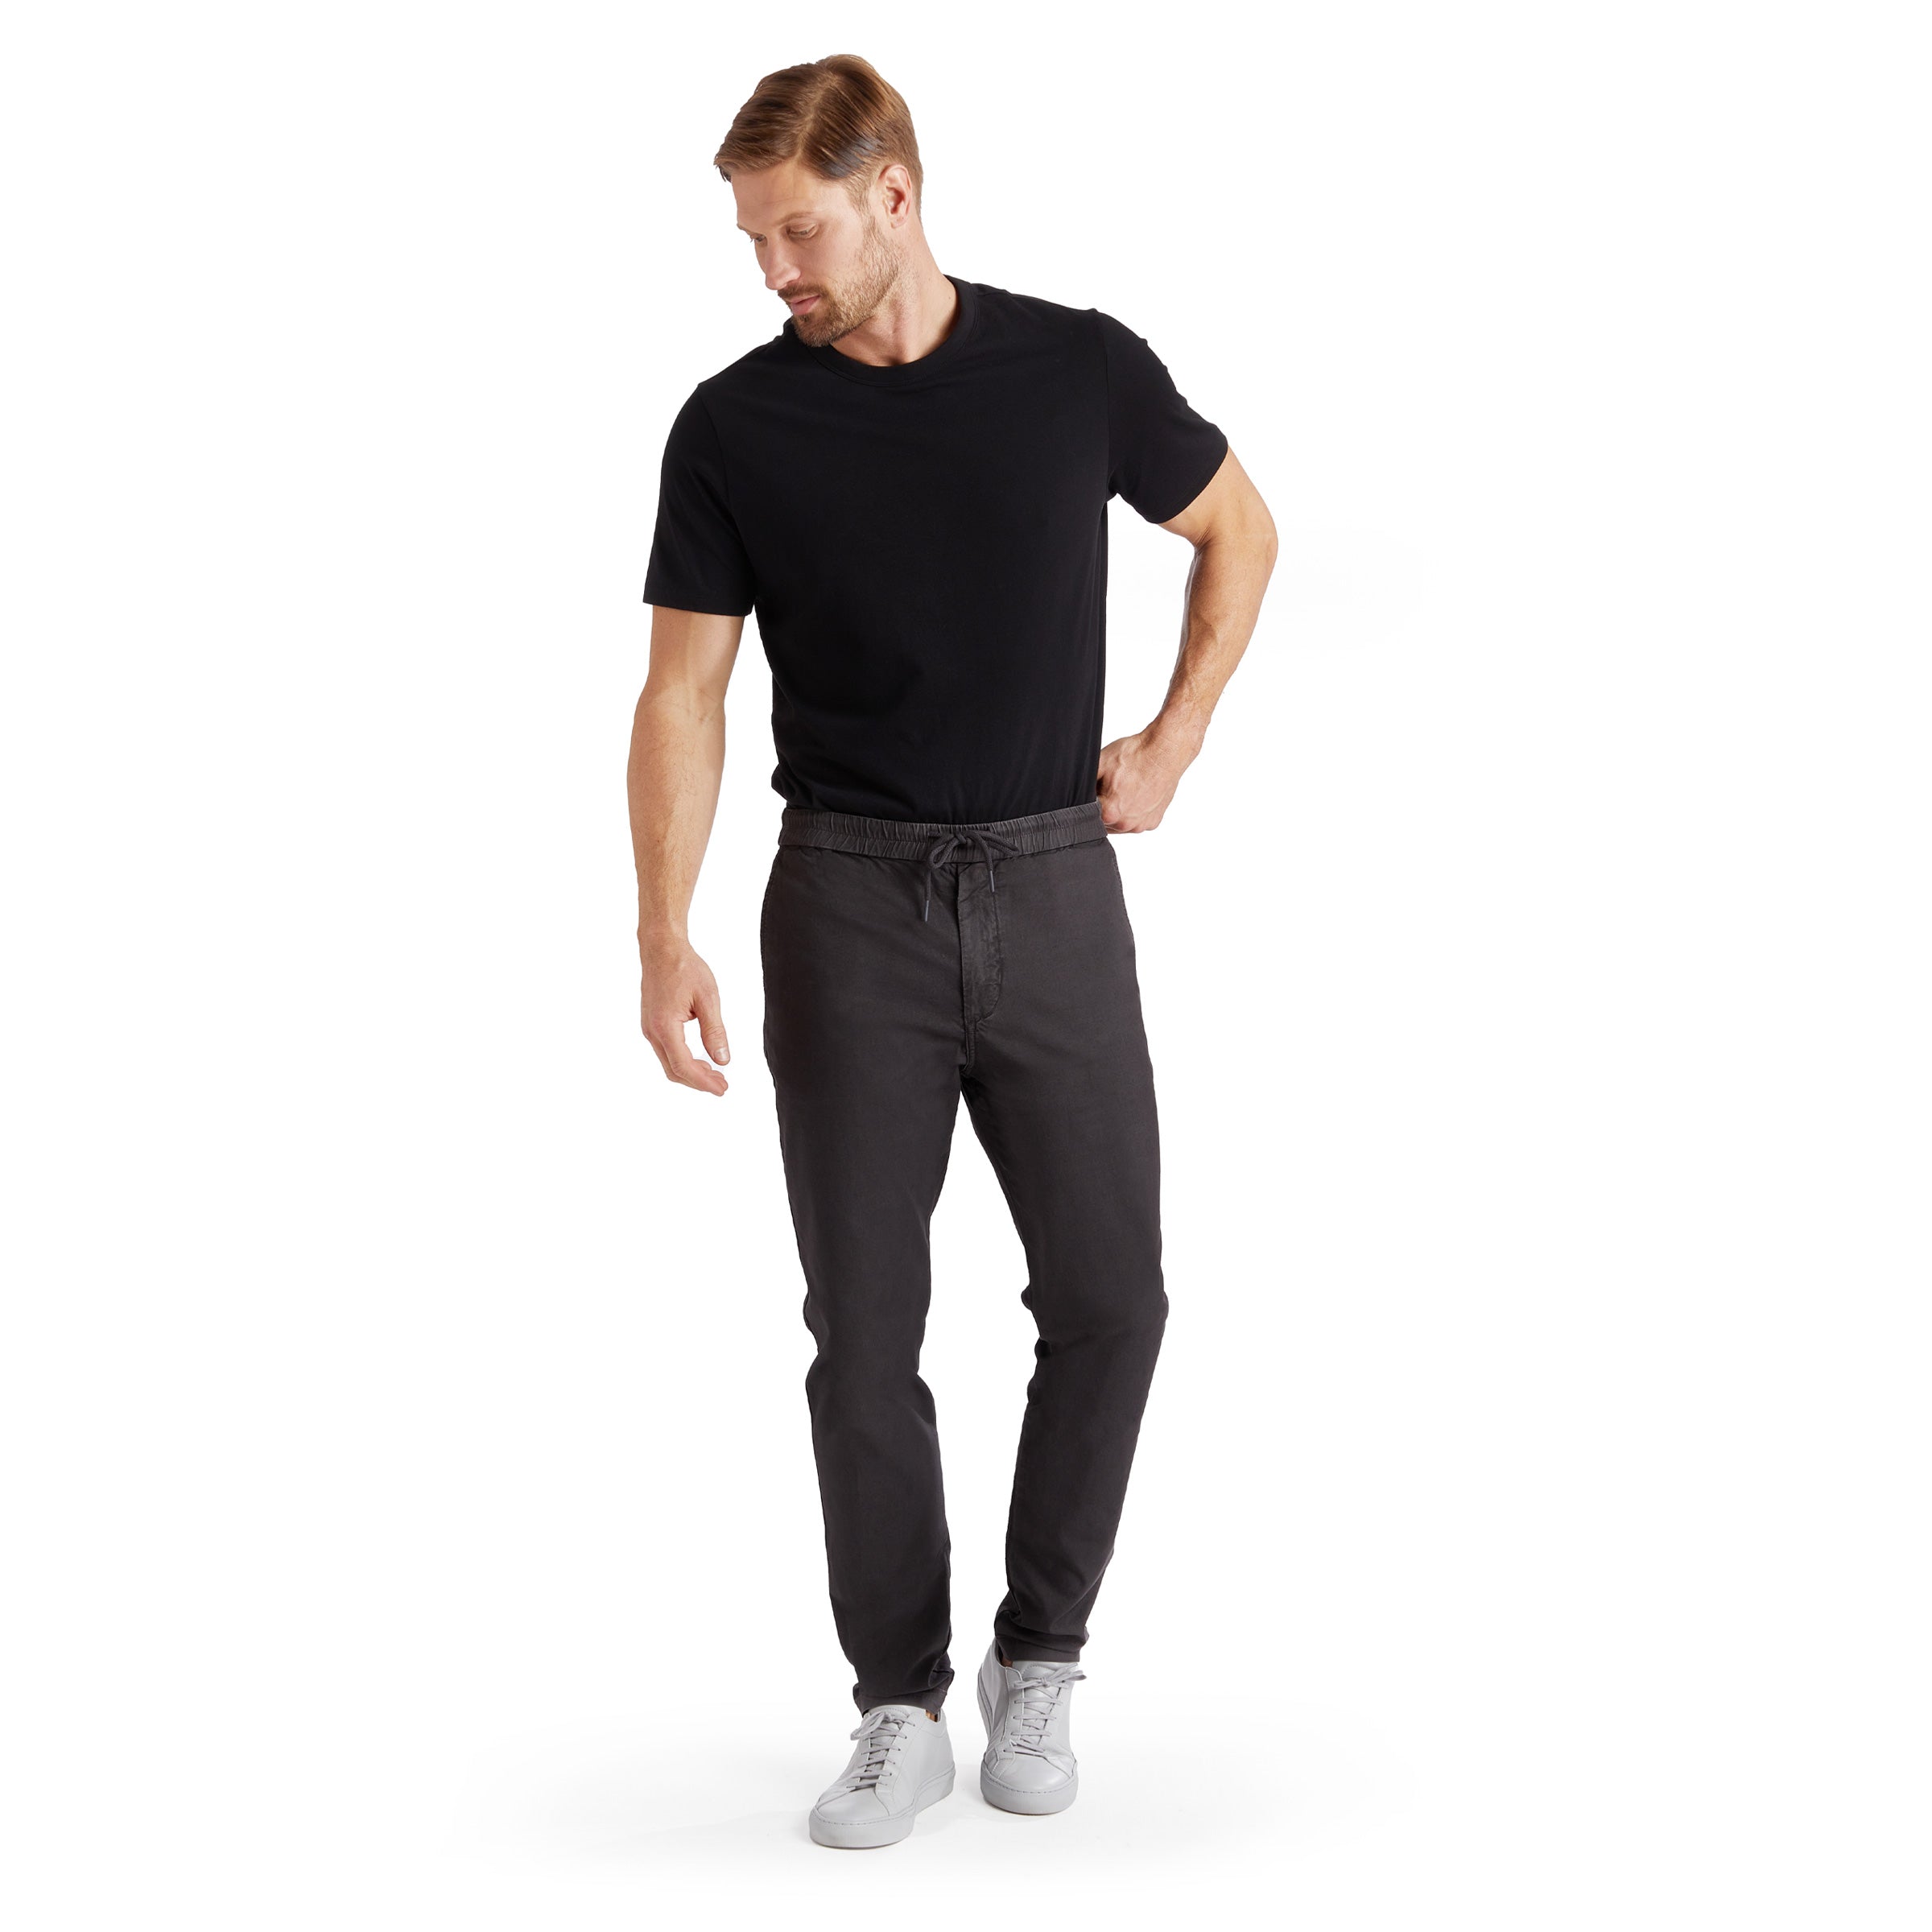 Men wearing Gris oscuro The Leisure Pants